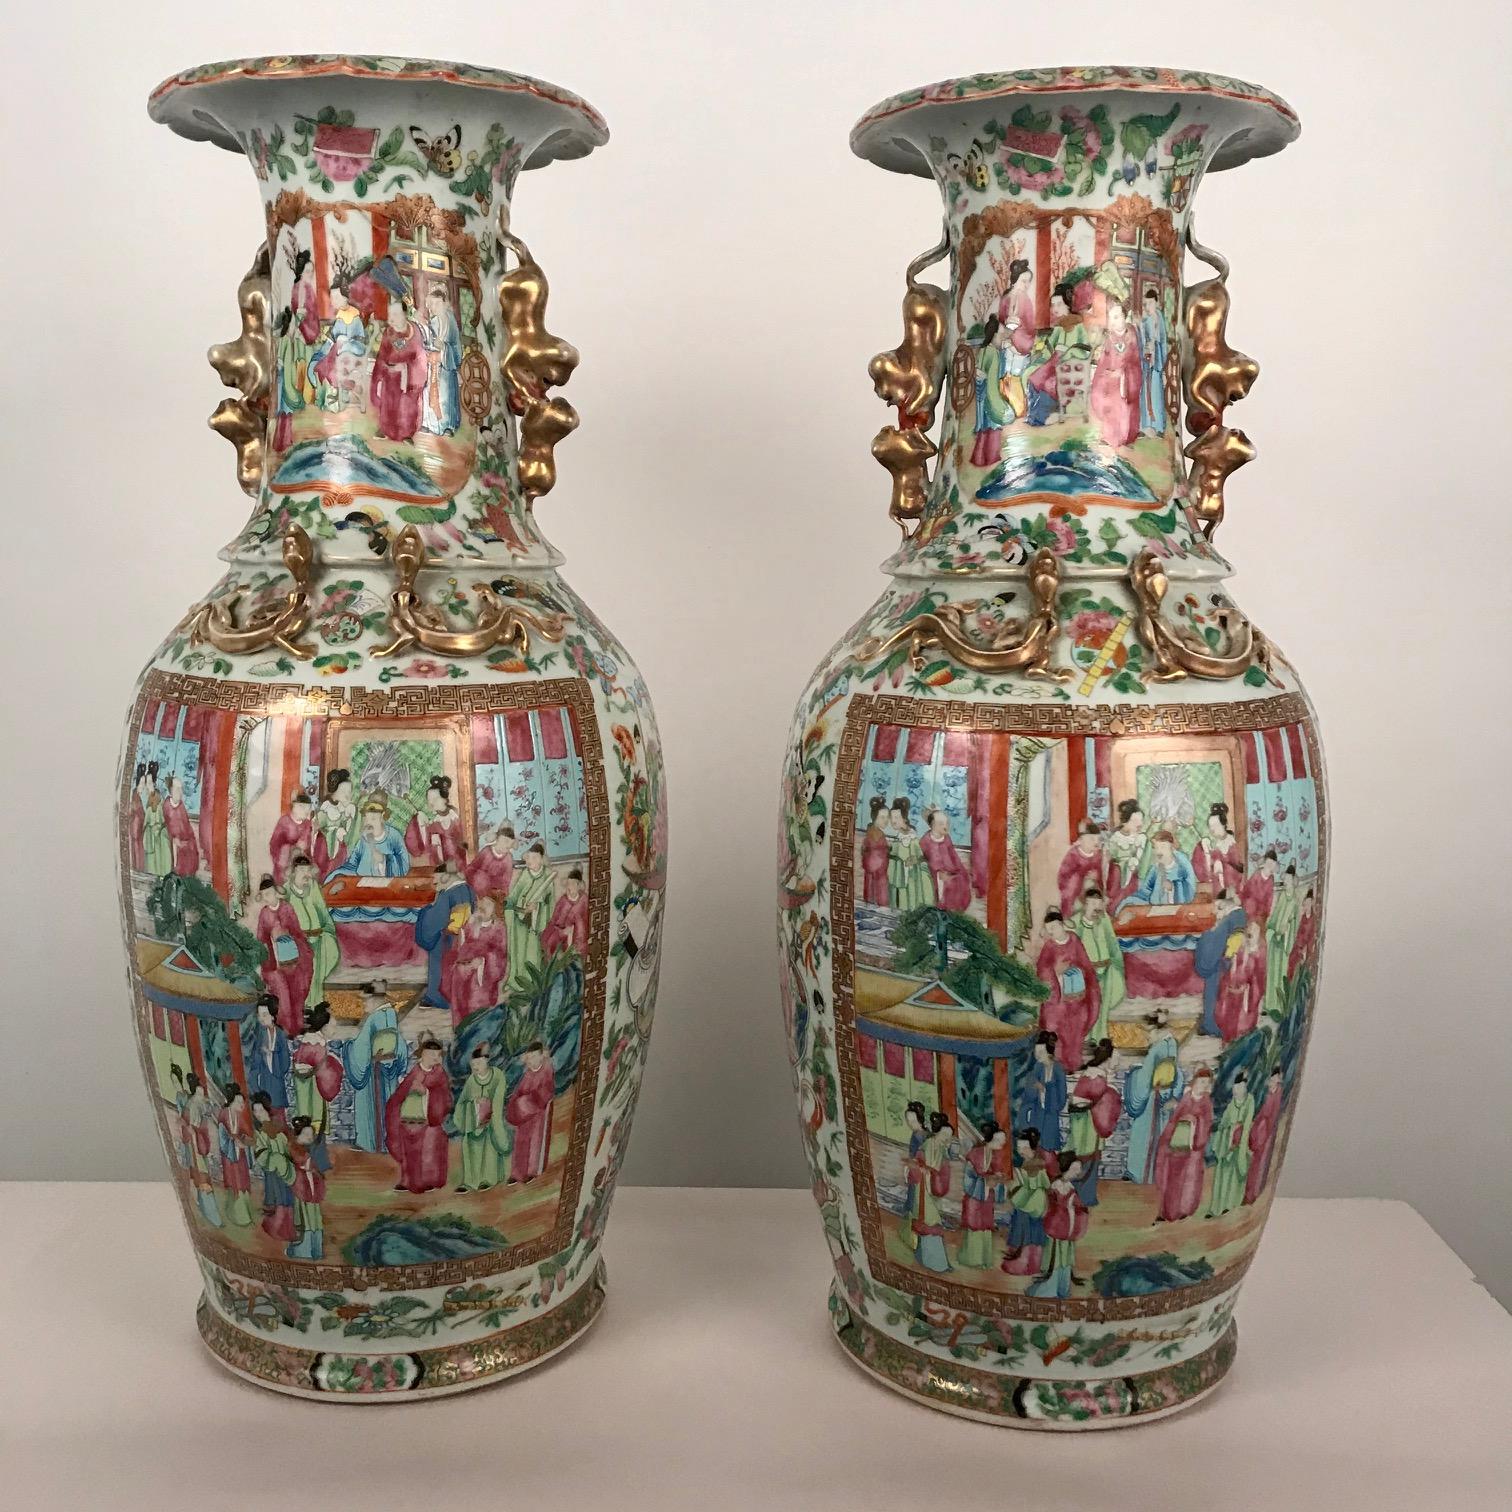 This pair are a very good example of the Rose Medallion or Famille Rose type, from scalloped rim to tapering base they are profusely decorated with flowers, fruit, butterflies and various auspicious emblems, the large reserves are filled with lively